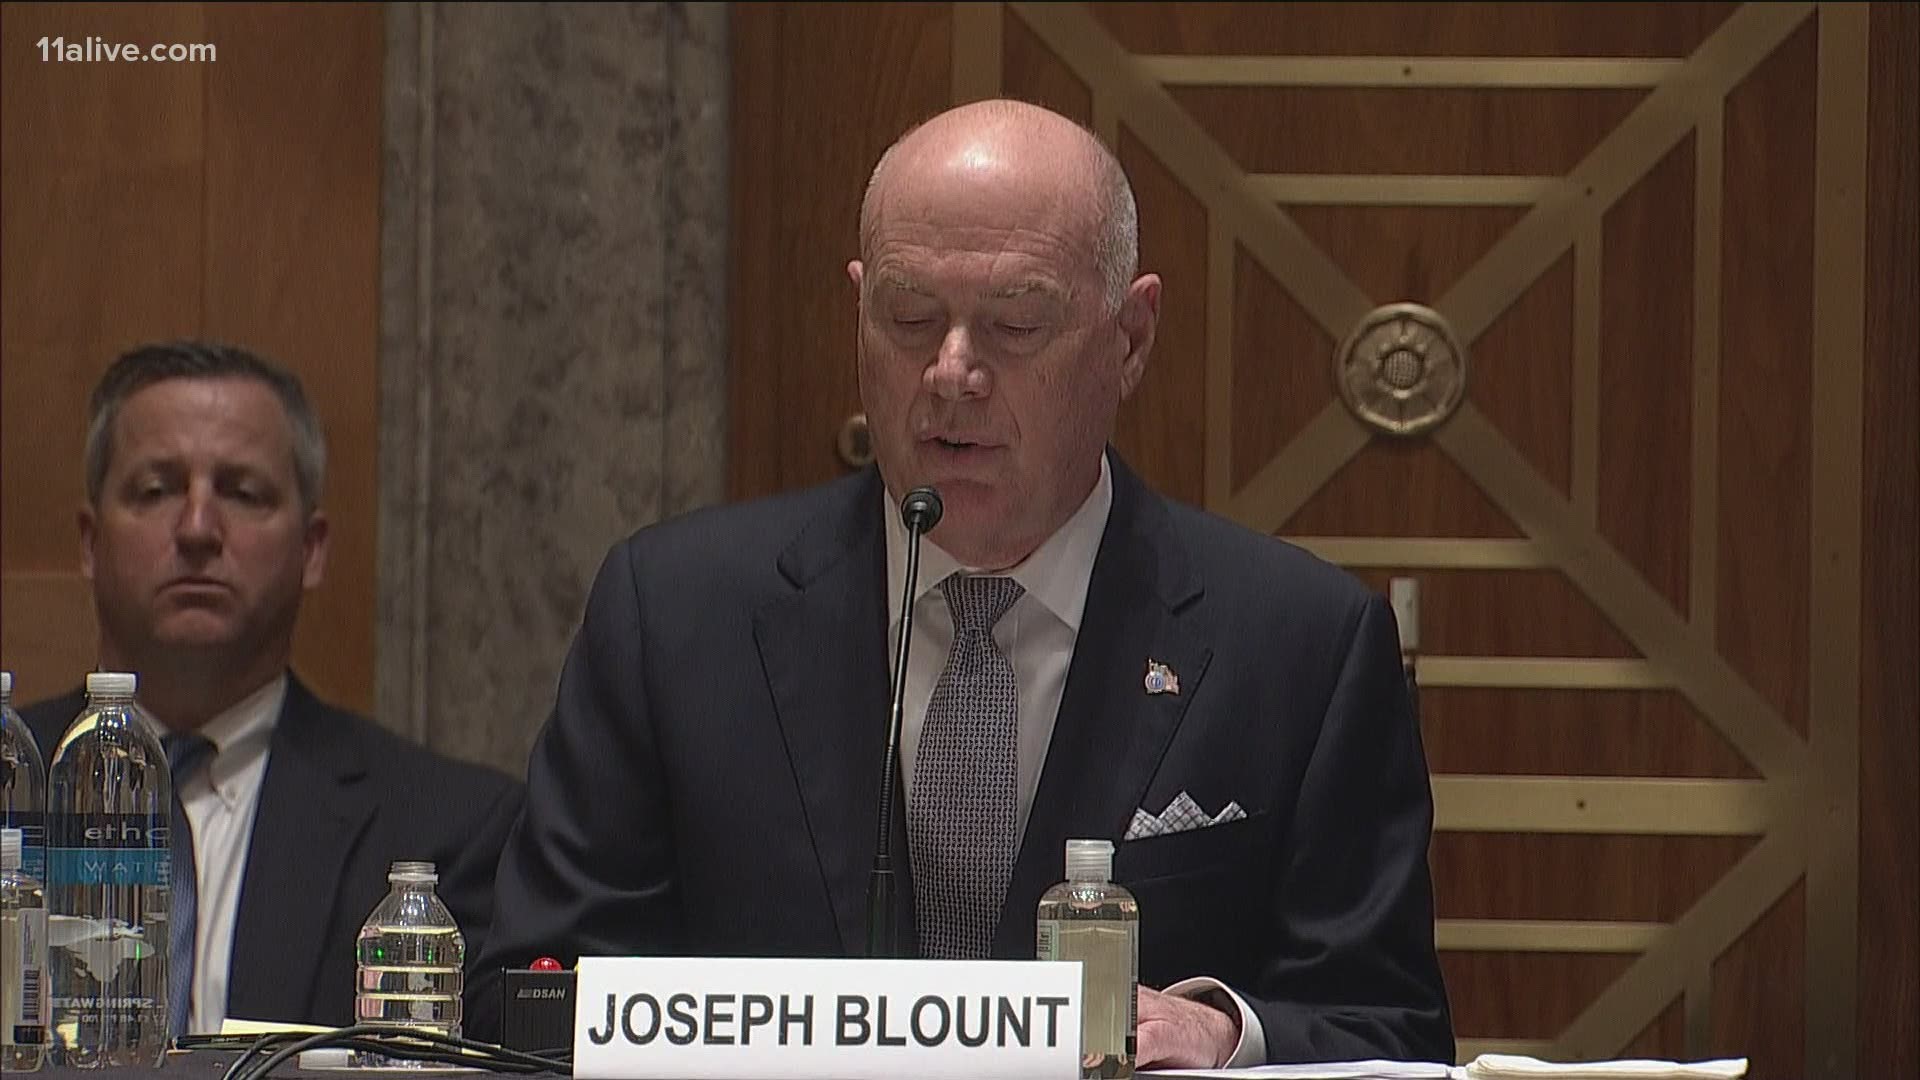 Blount's testimony, his first since the May 7 cyberattack that led the pipeline to halt operations, underscored the dilemma facing both the private industry and the